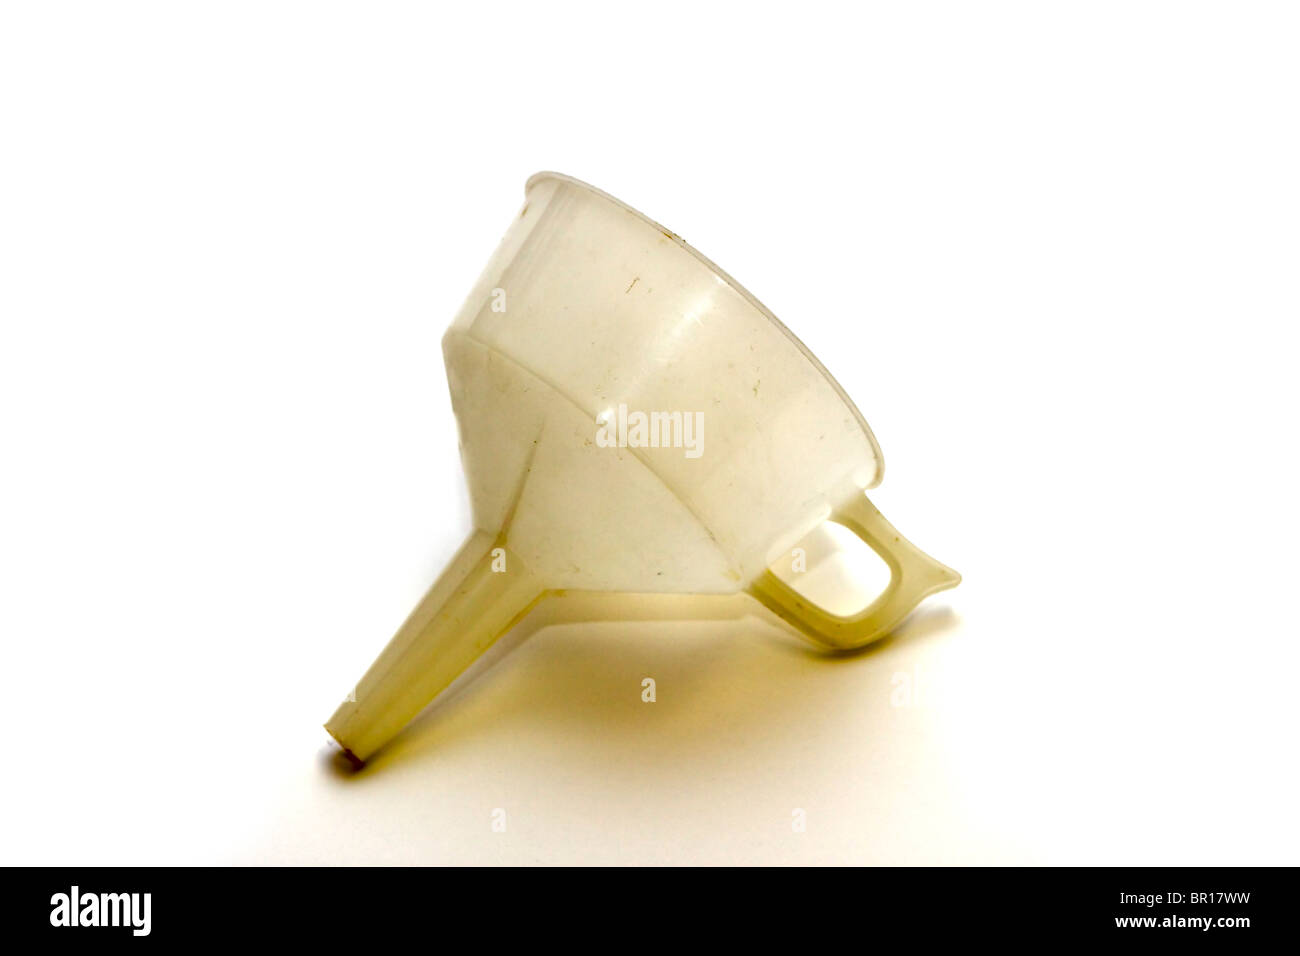 Dirty white plastic funnel Stock Photo